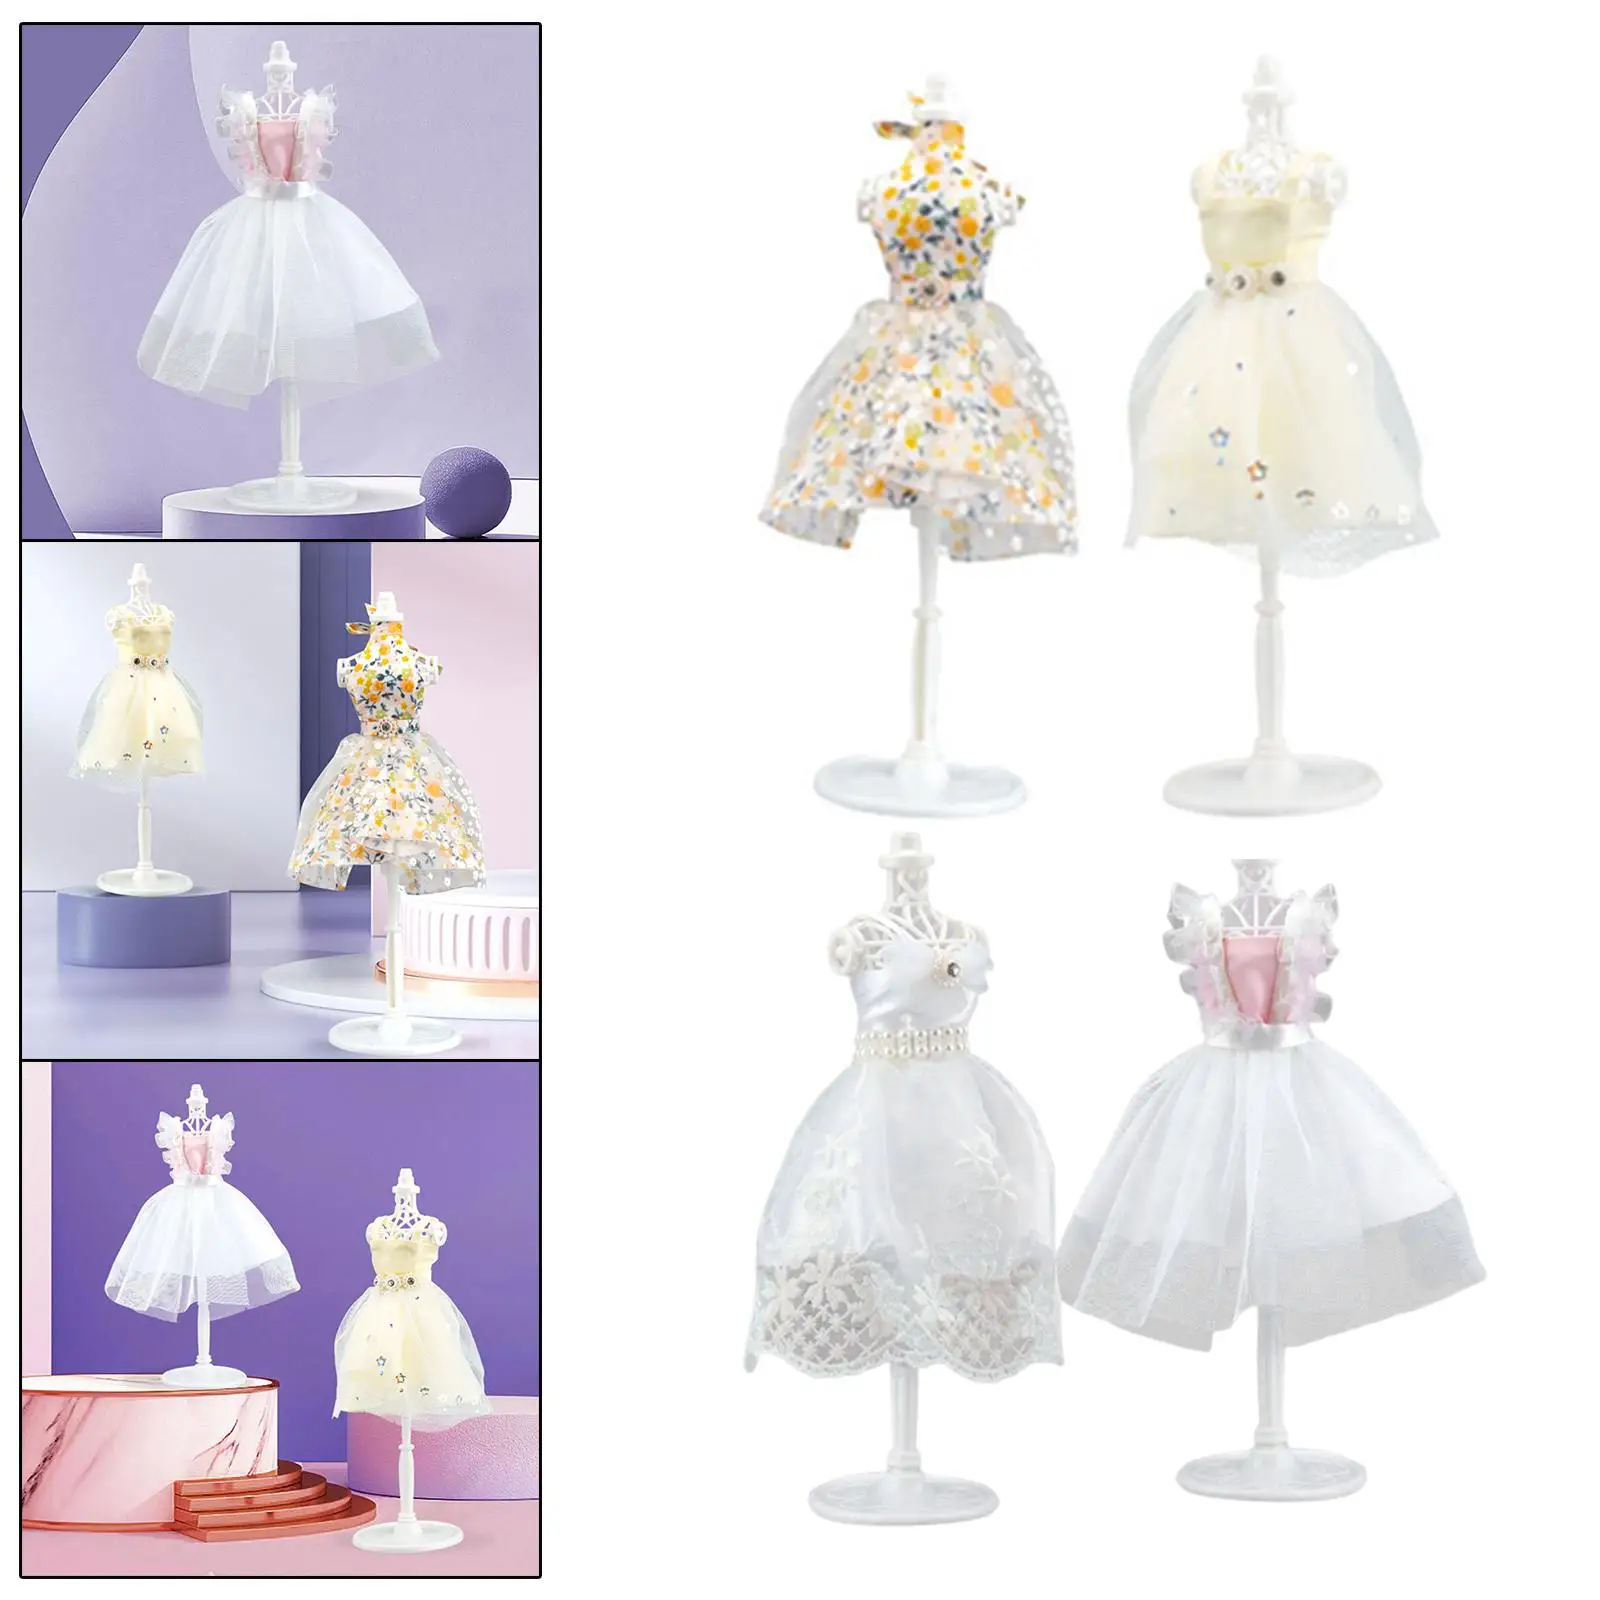 Fashion Design Kit Exquisite Doll Clothes Making diy Crafts Kit Creativity Learning Toys Doll Clothing design for Girls